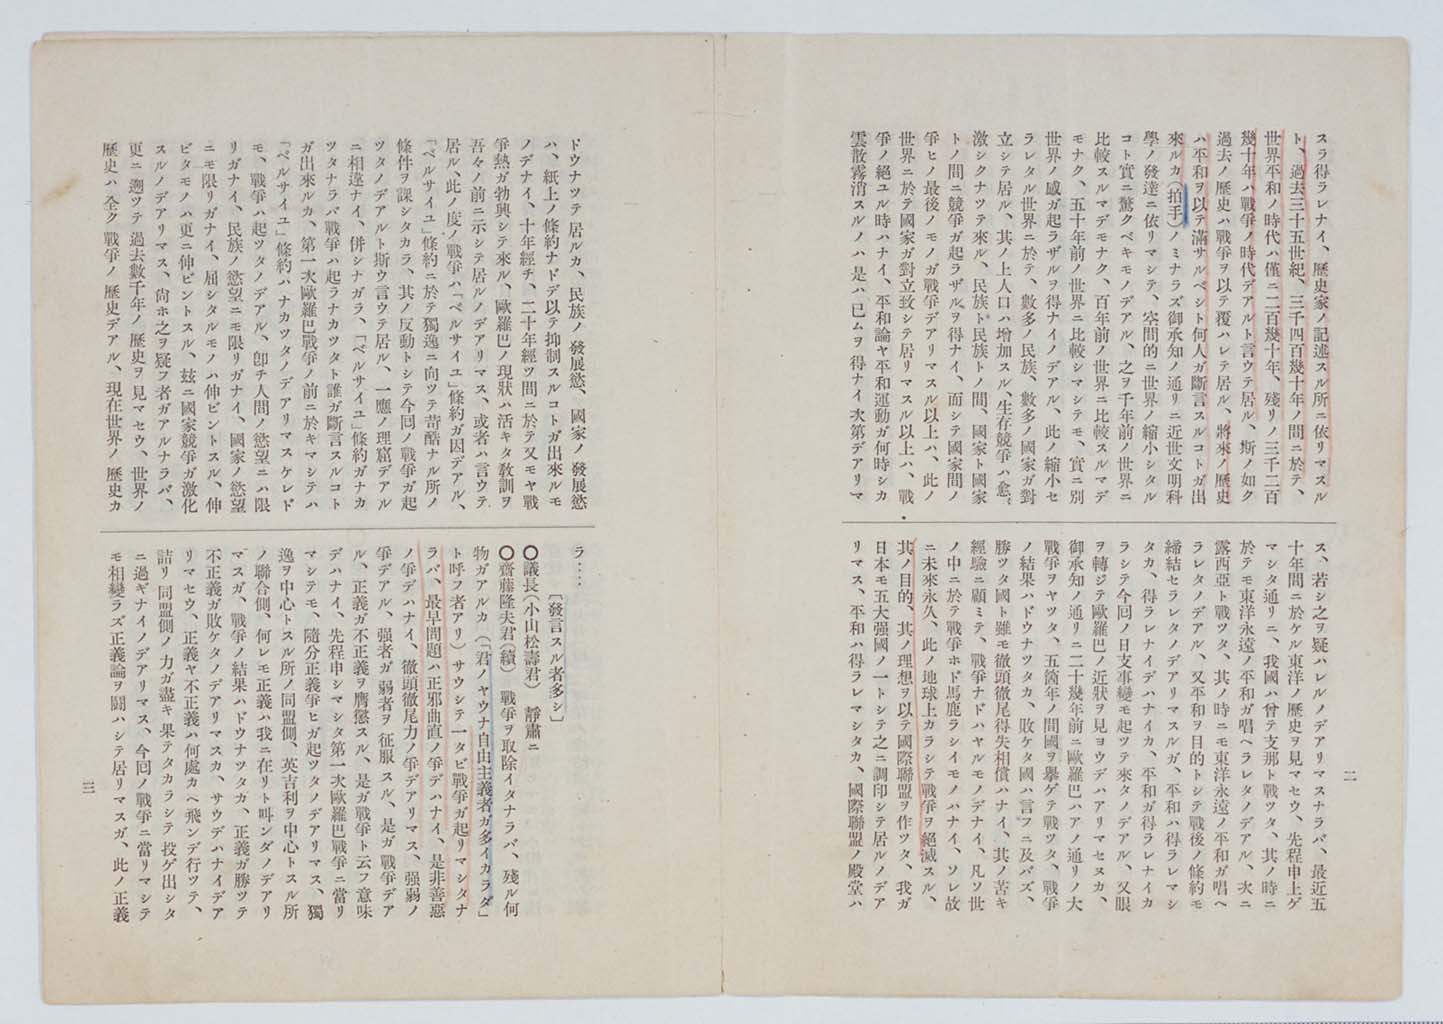 Excised Portion of SAITO Takao's Speech(larger)